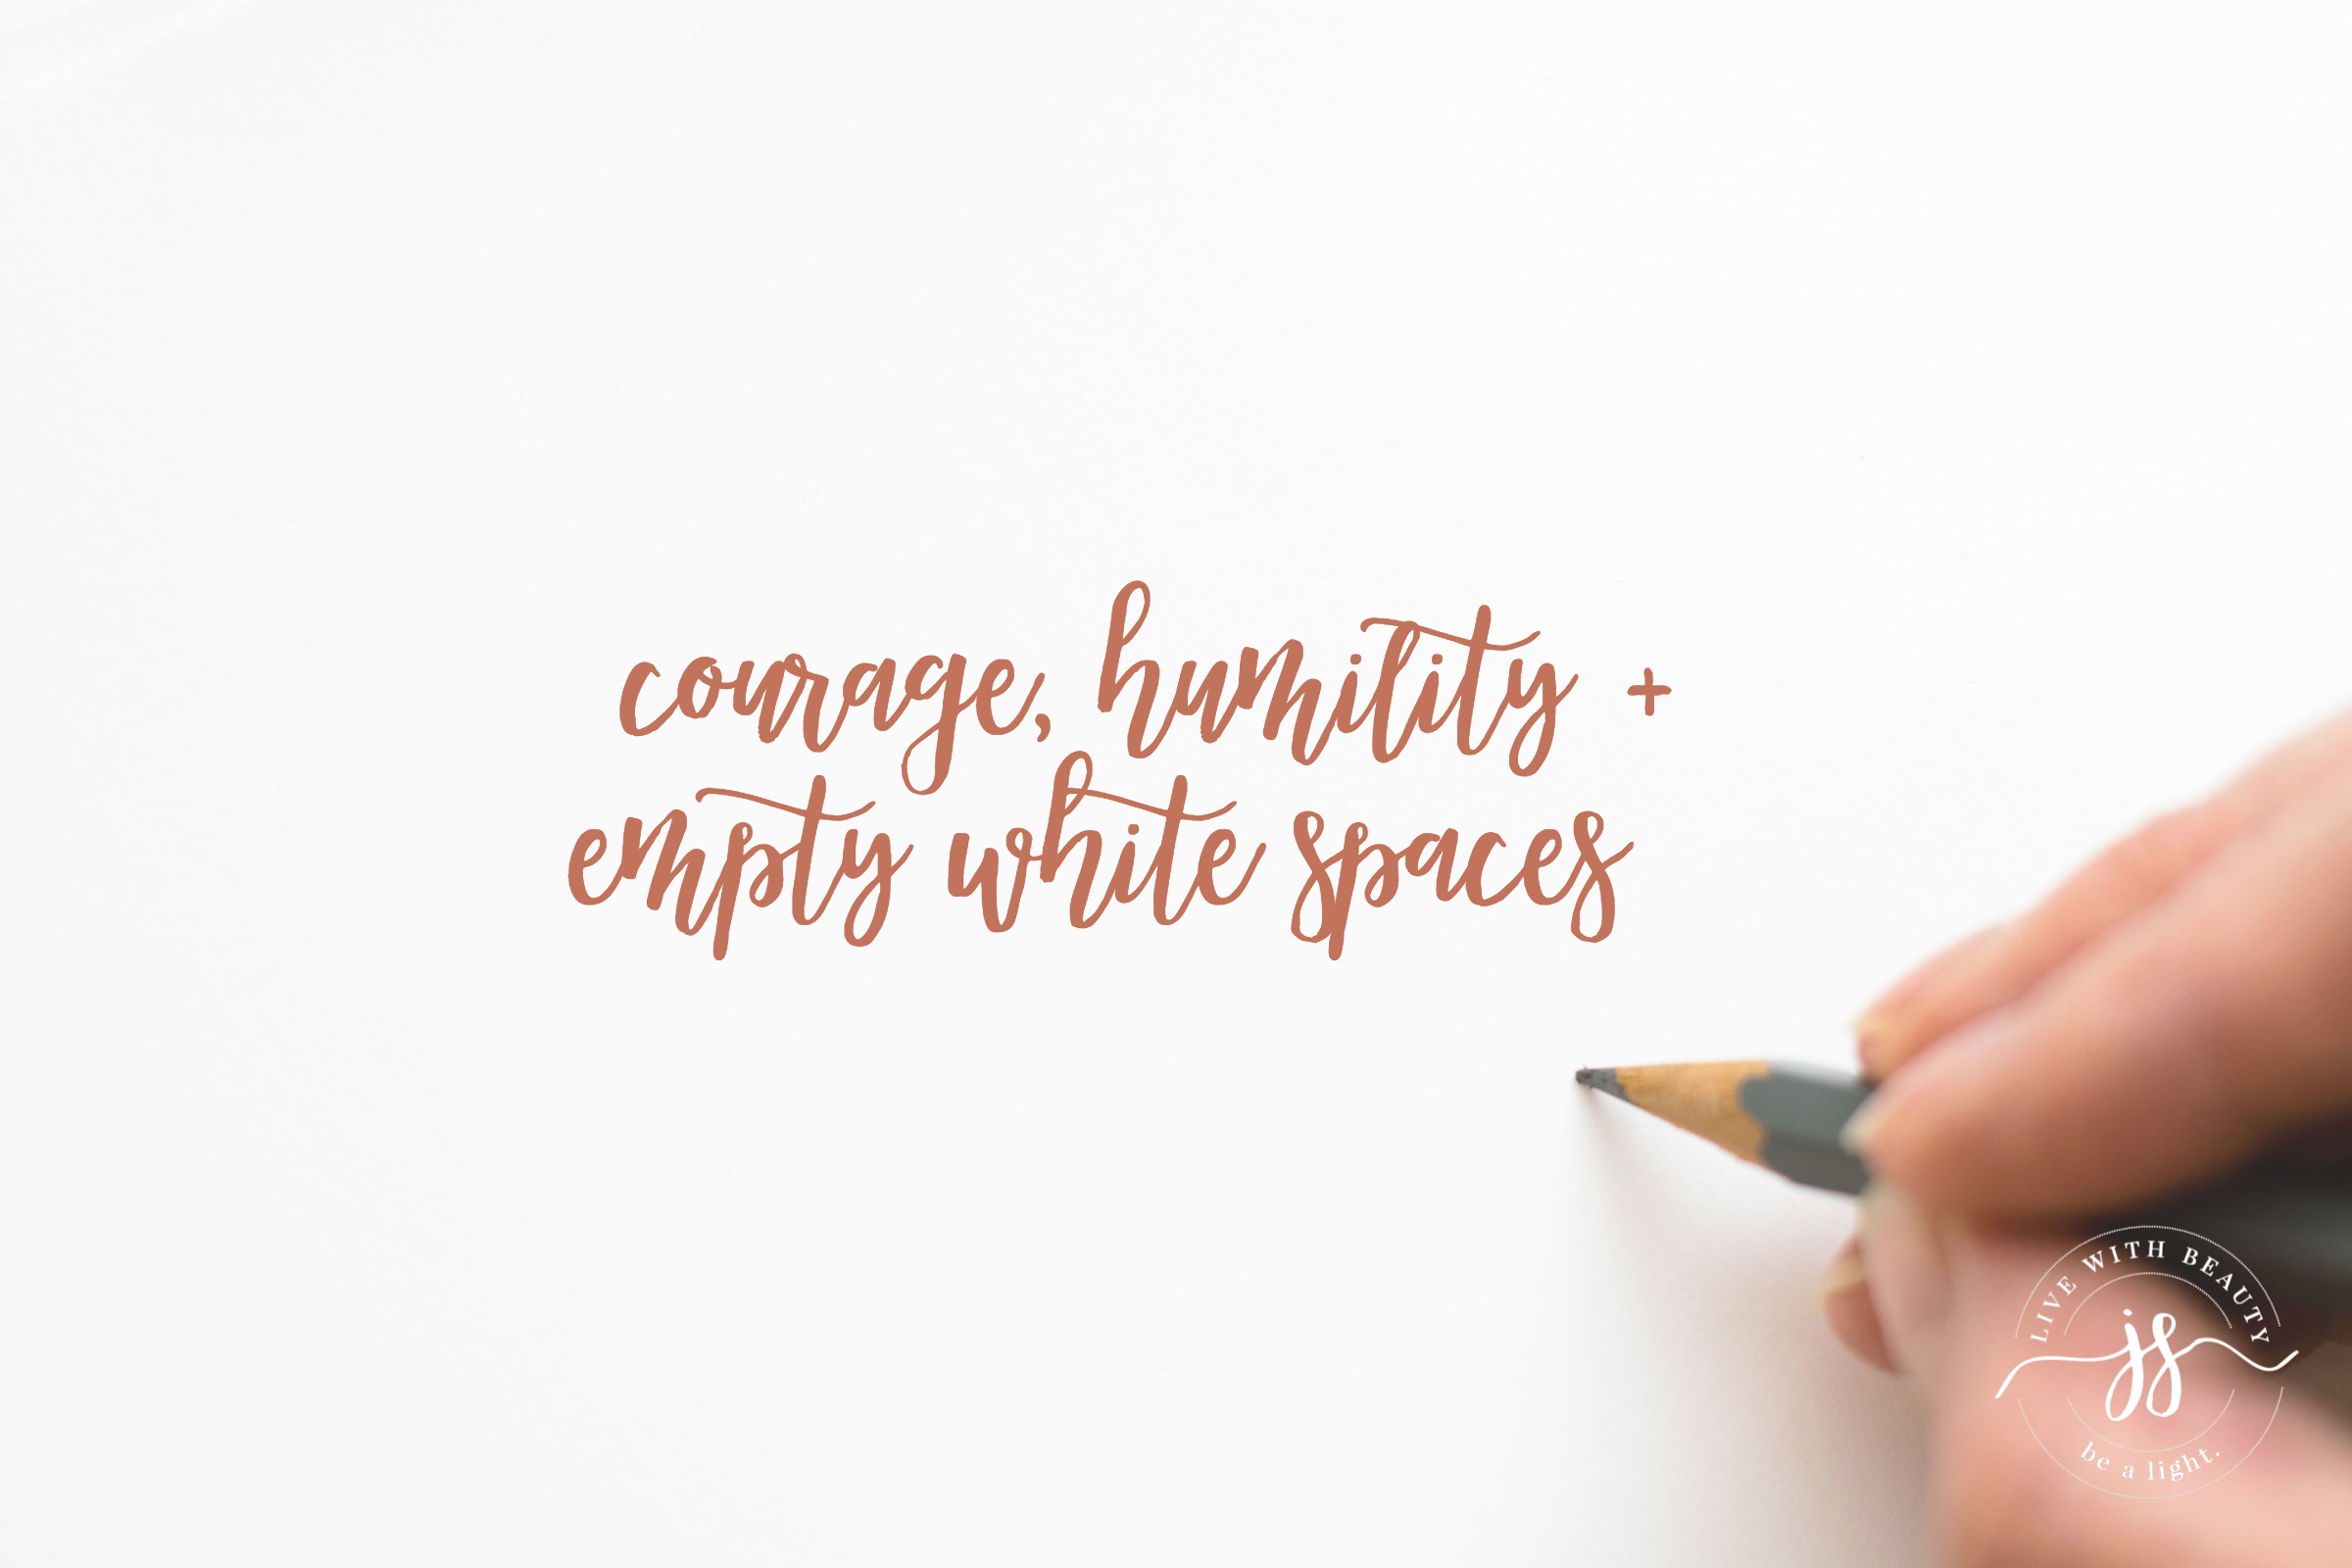 Courage, Humility, and Empty White Spaces